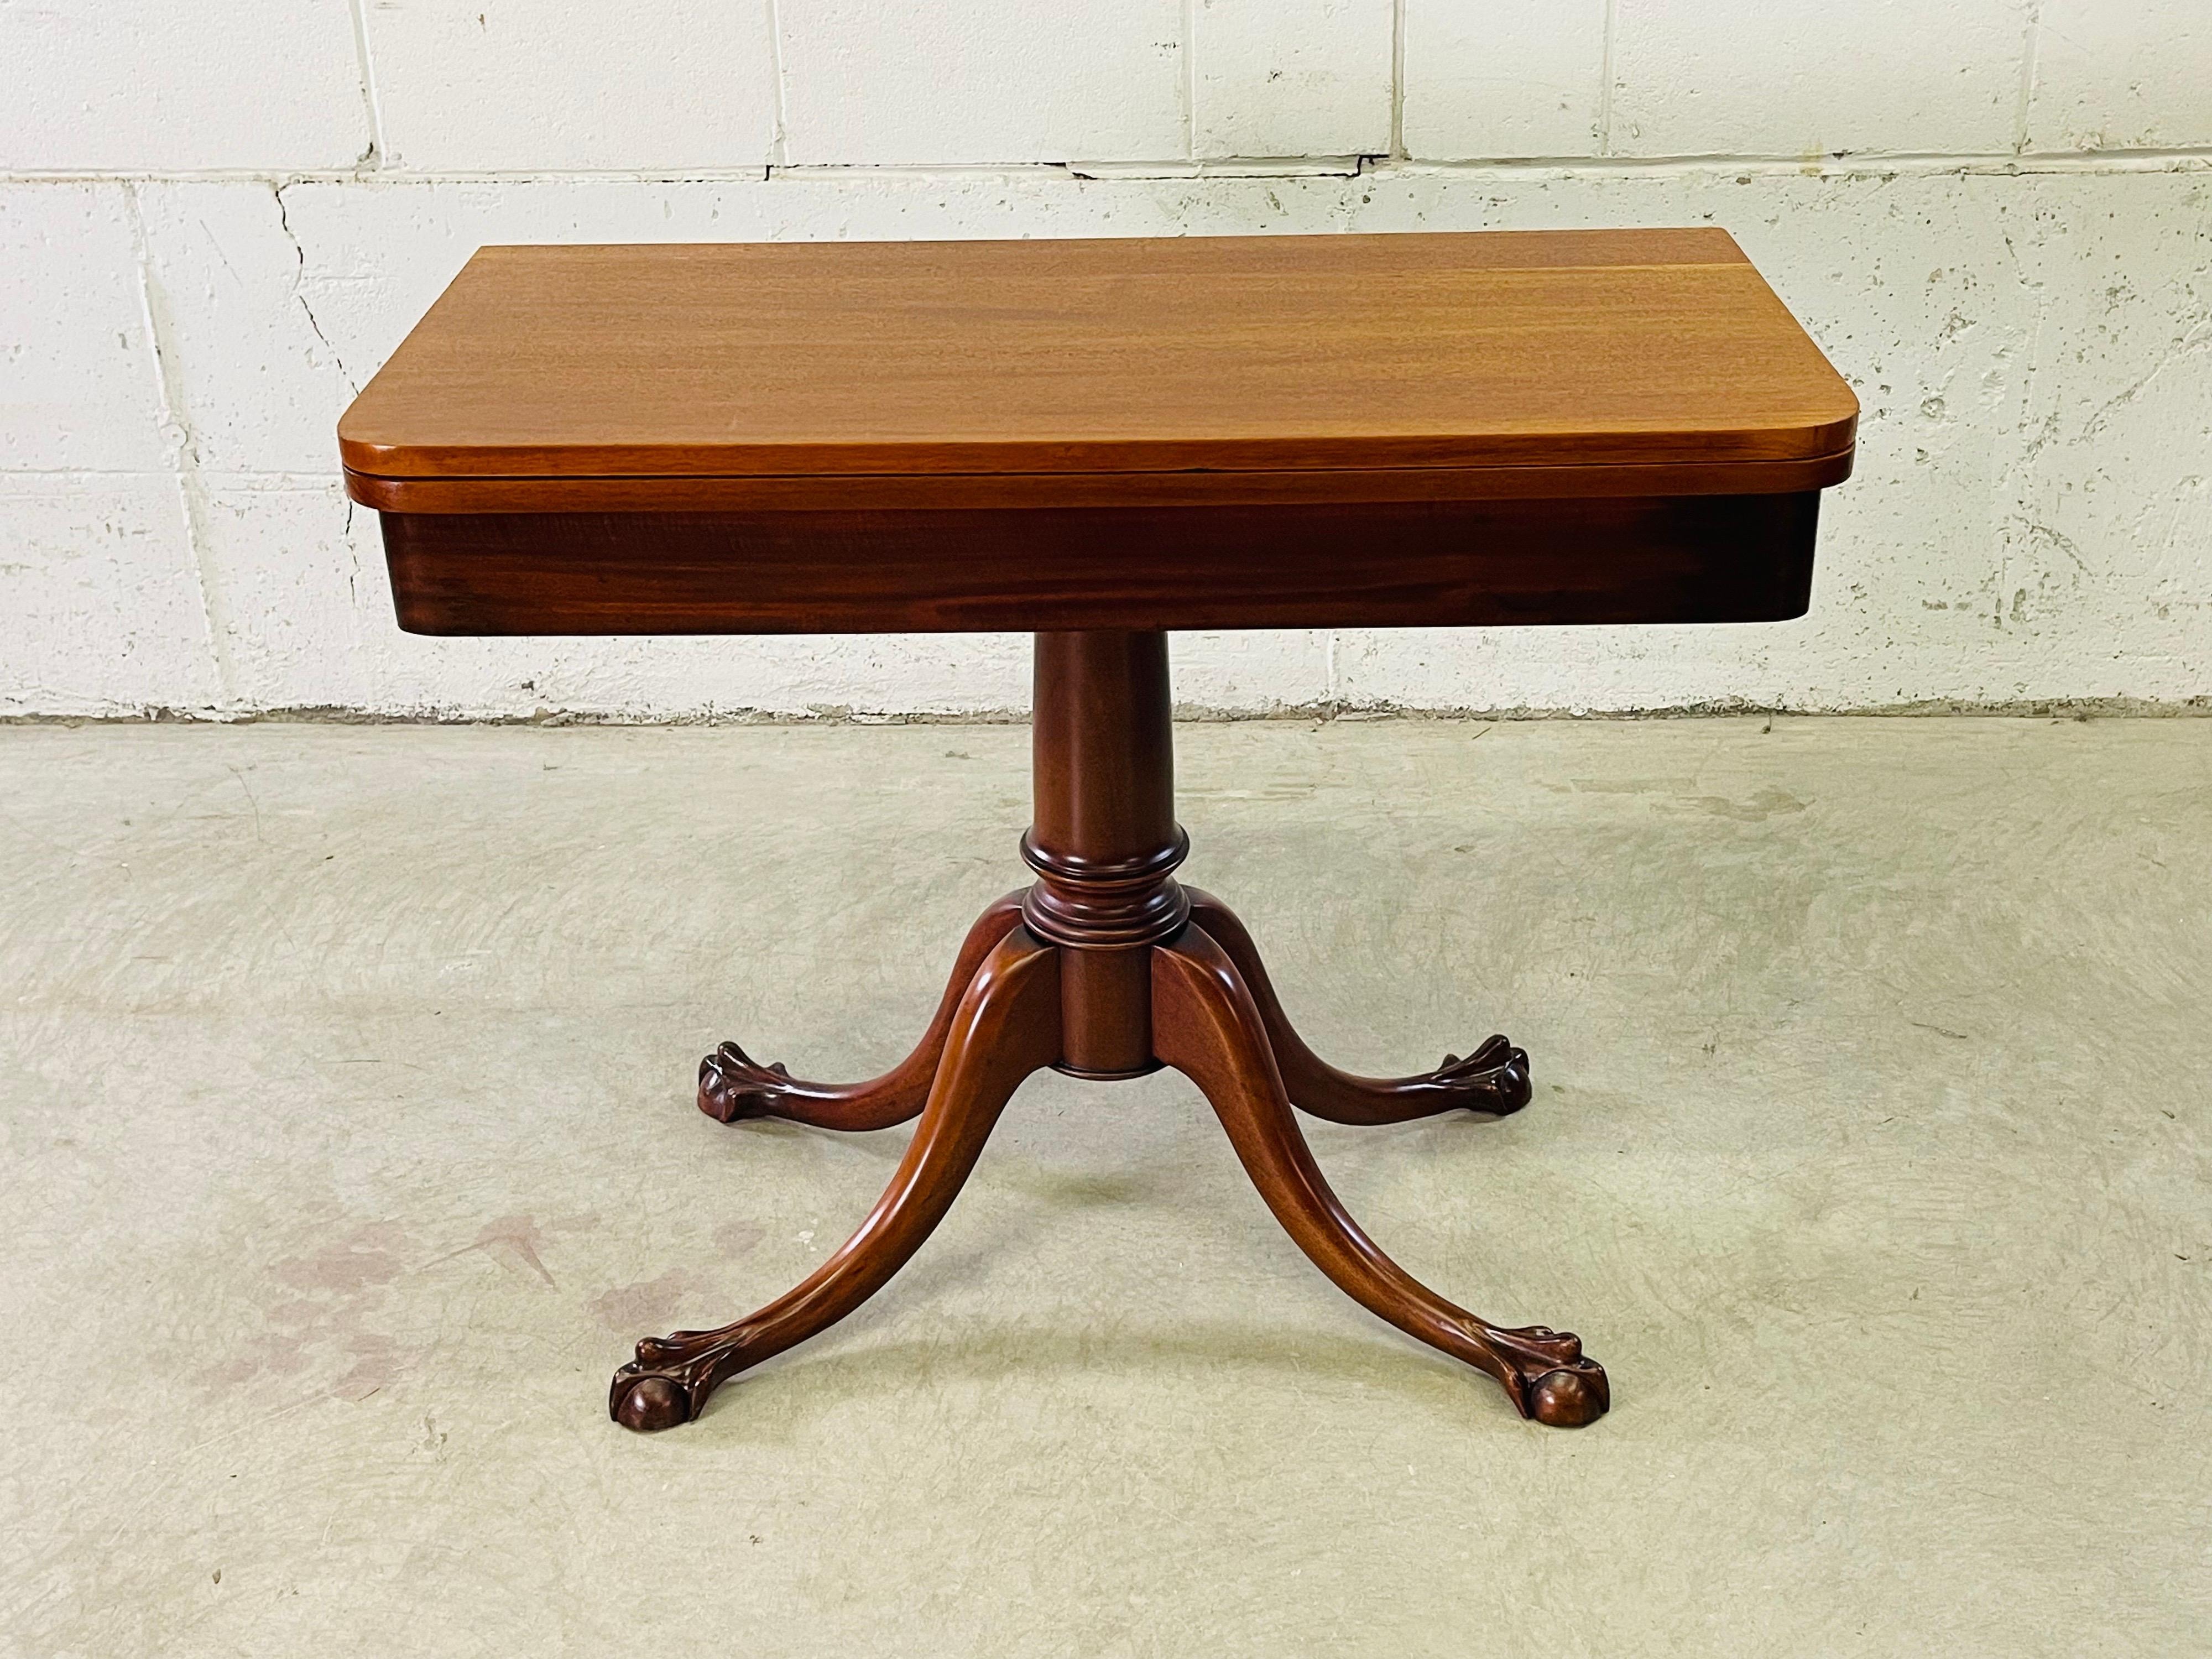 Vintage 1930s solid mahogany ball and claw foot game table. The table closes to be a rectangular side table and opens to be a square table. Can be used for more then games. Table does have storage inside. Fully open the table measures 36”W x 36”L.